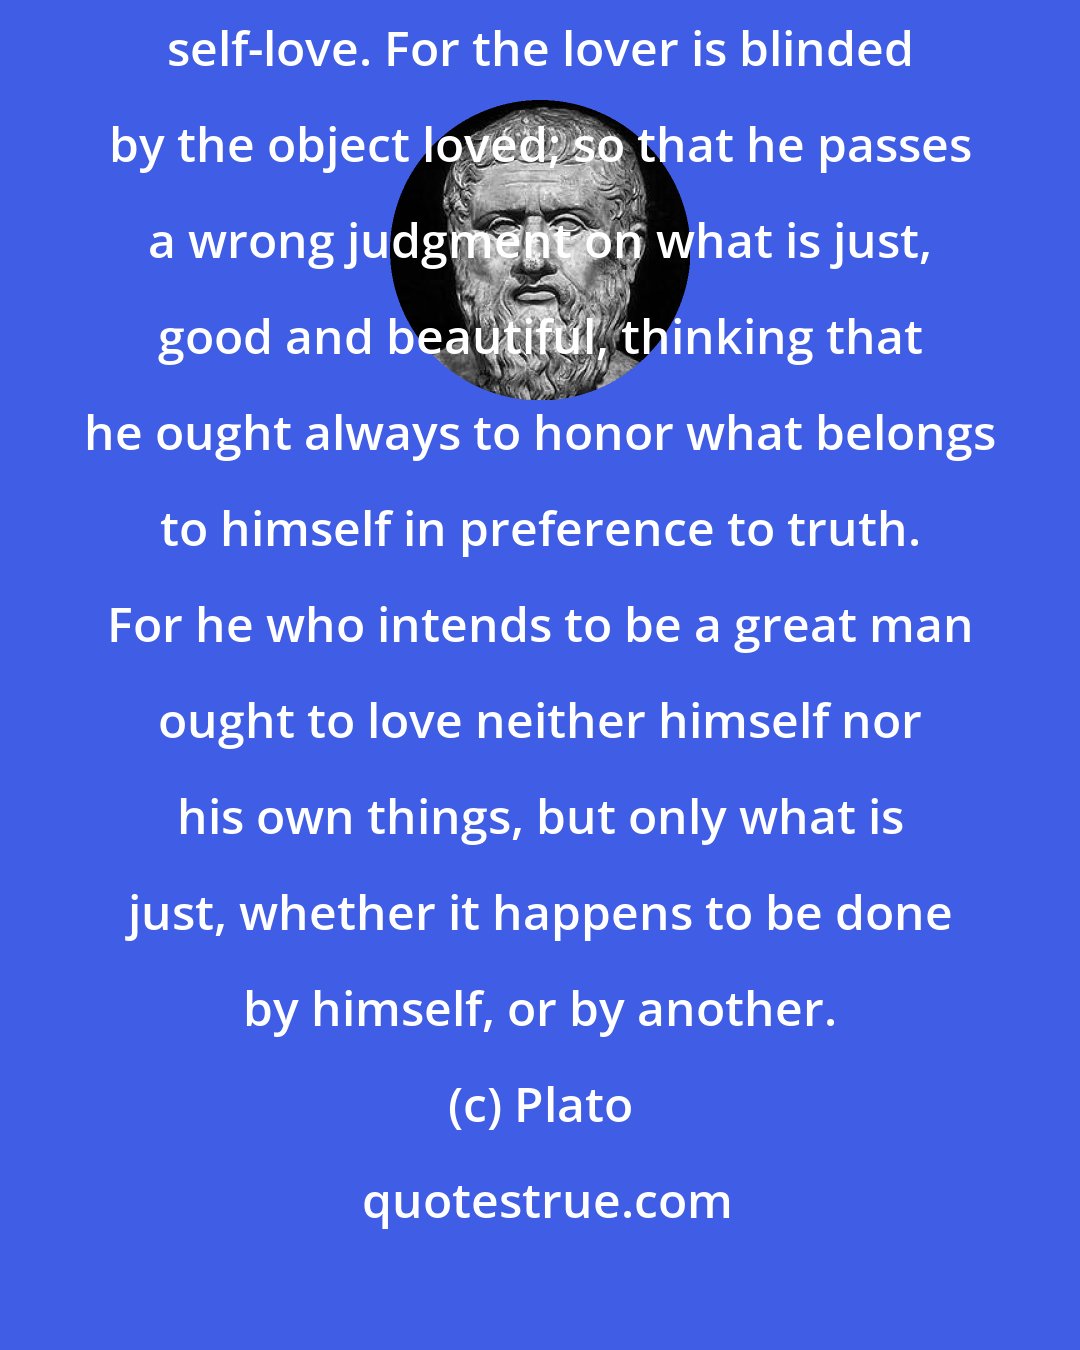 Plato: The cause of all the blunders committed by man arises from this excessive self-love. For the lover is blinded by the object loved; so that he passes a wrong judgment on what is just, good and beautiful, thinking that he ought always to honor what belongs to himself in preference to truth. For he who intends to be a great man ought to love neither himself nor his own things, but only what is just, whether it happens to be done by himself, or by another.